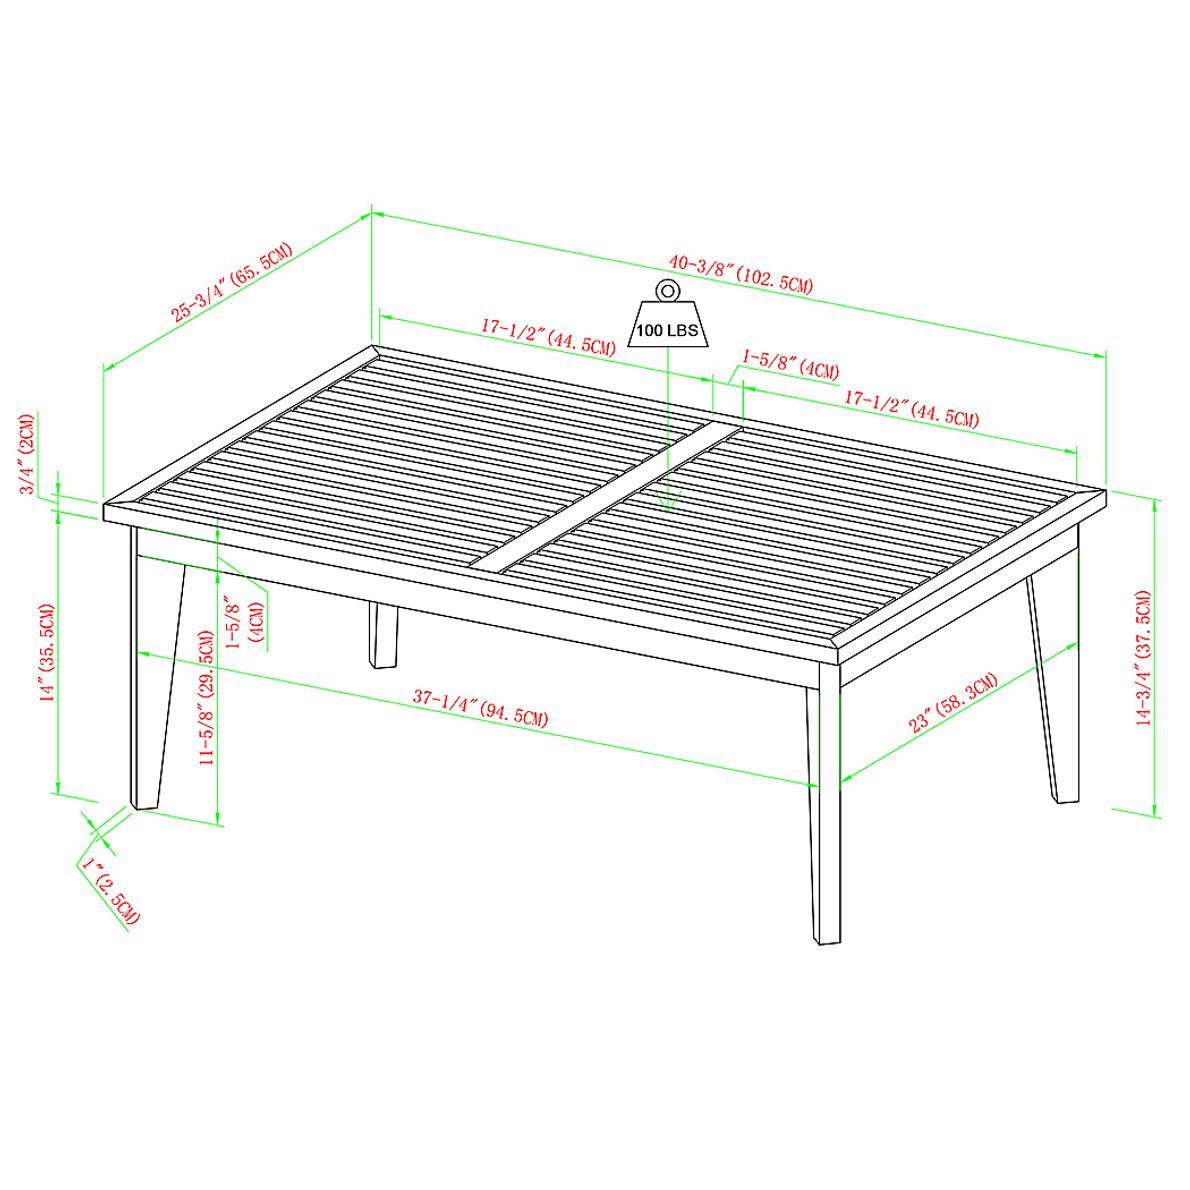 Outdoor Baypool Brown Cocktail Table